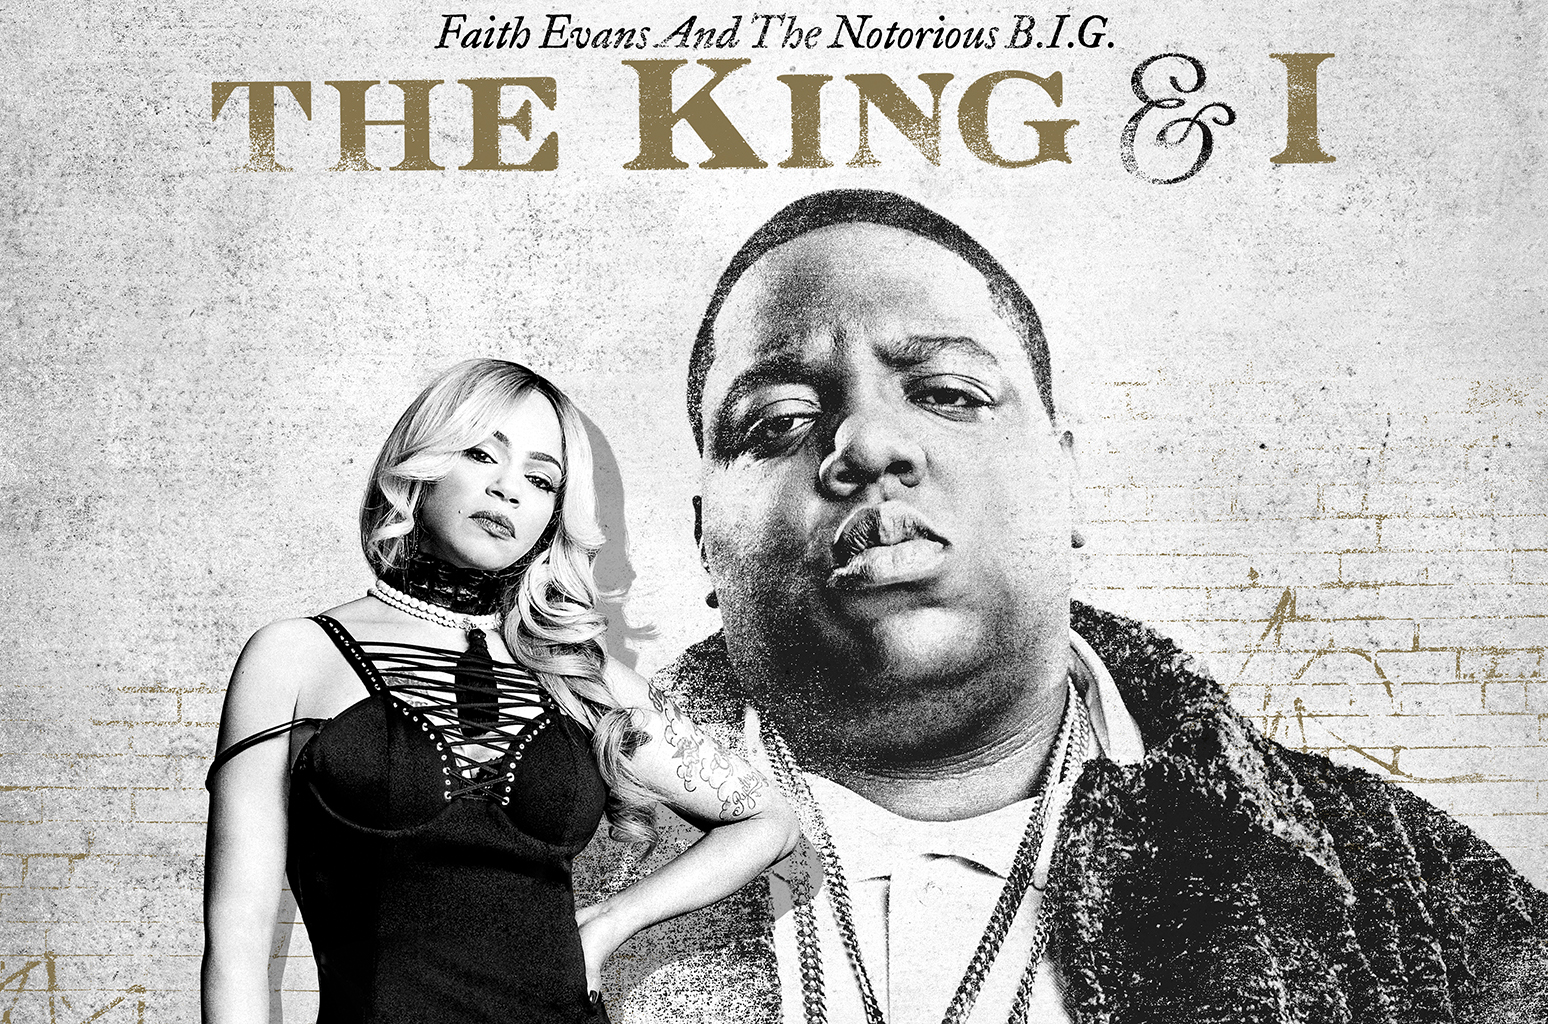 [New Music] Faith Evans & Notorious B.I.G. – “When We Party” feat. Snoop Dogg